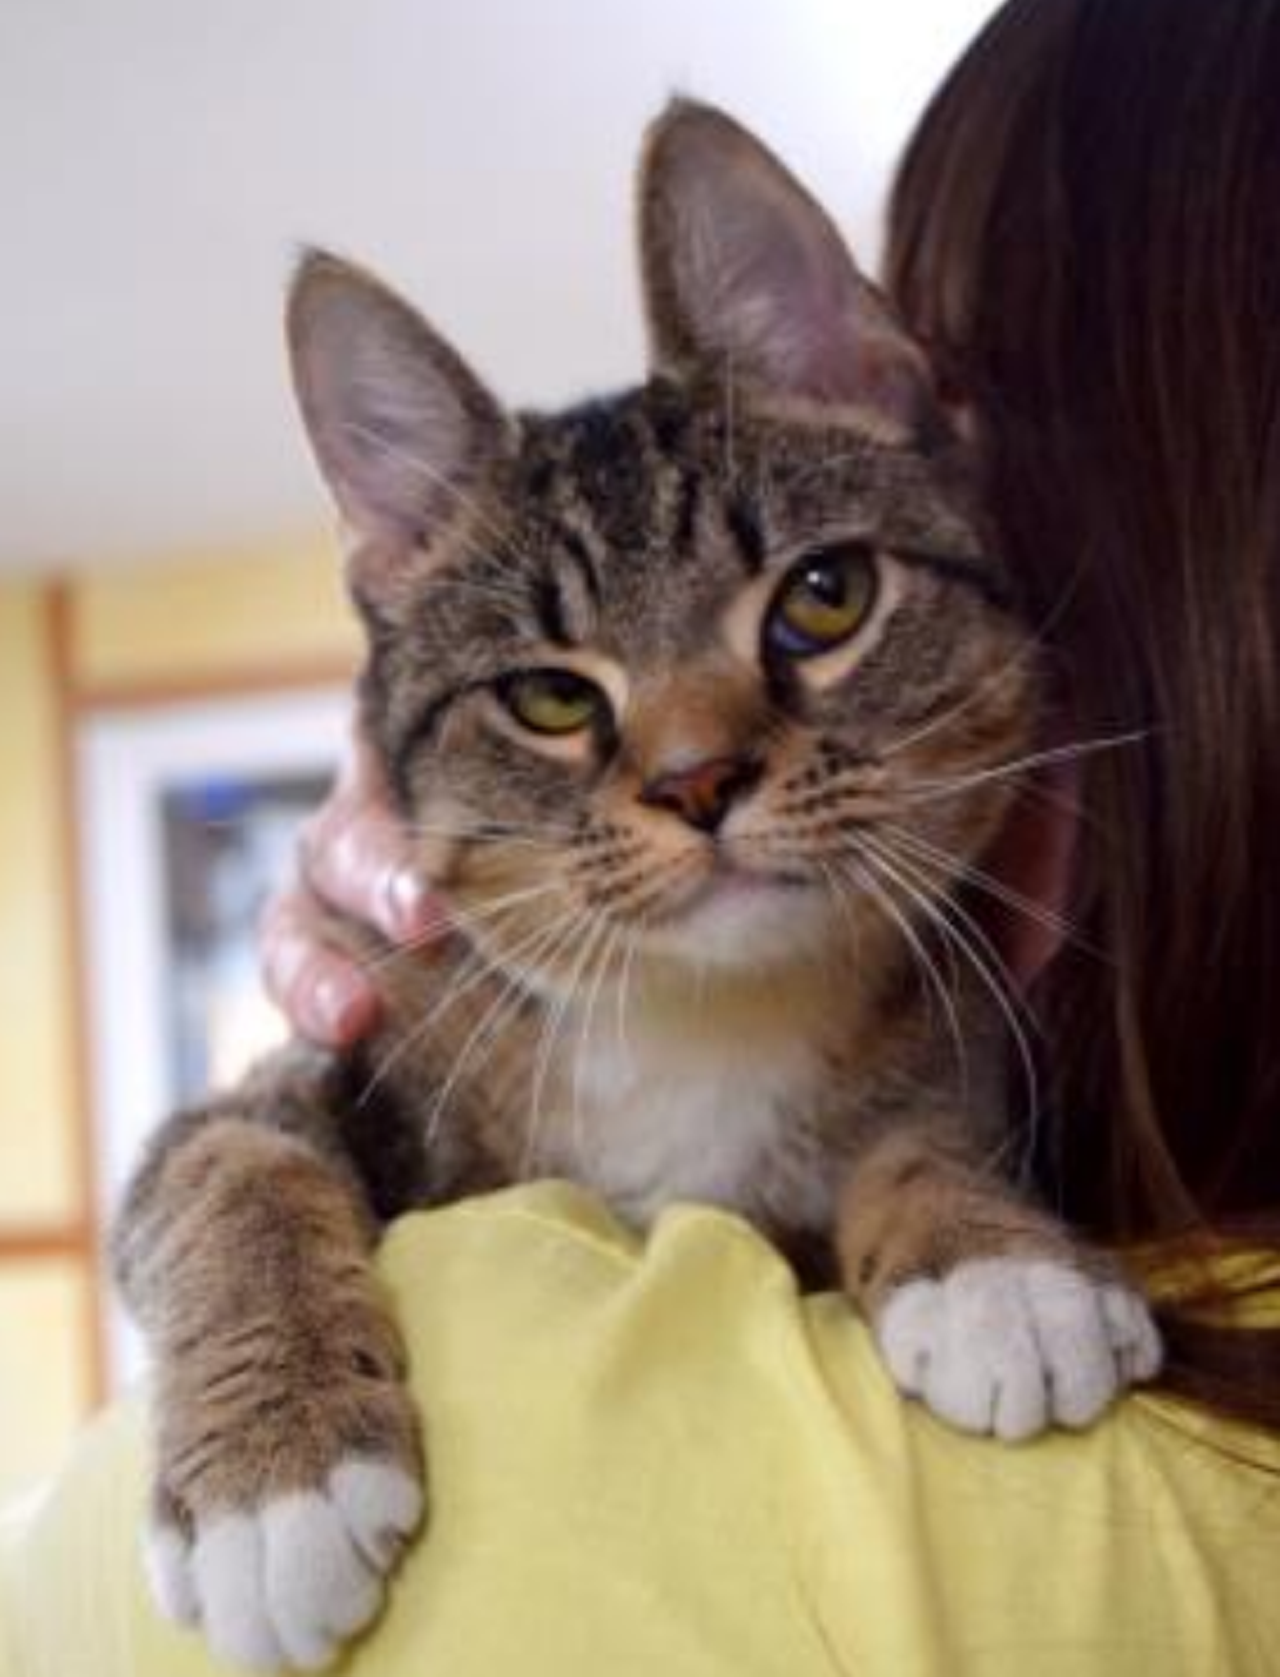 Chadie
"PLAY, PLAY, PLAY! Hi! I am Chadie! You might have guessed that I am a ball of energy and I LOVE to play! I have so many friends (Captain Americat is my FAVORITE!) and love everyone I meet. I like to cuddle after a long day of playing too!"